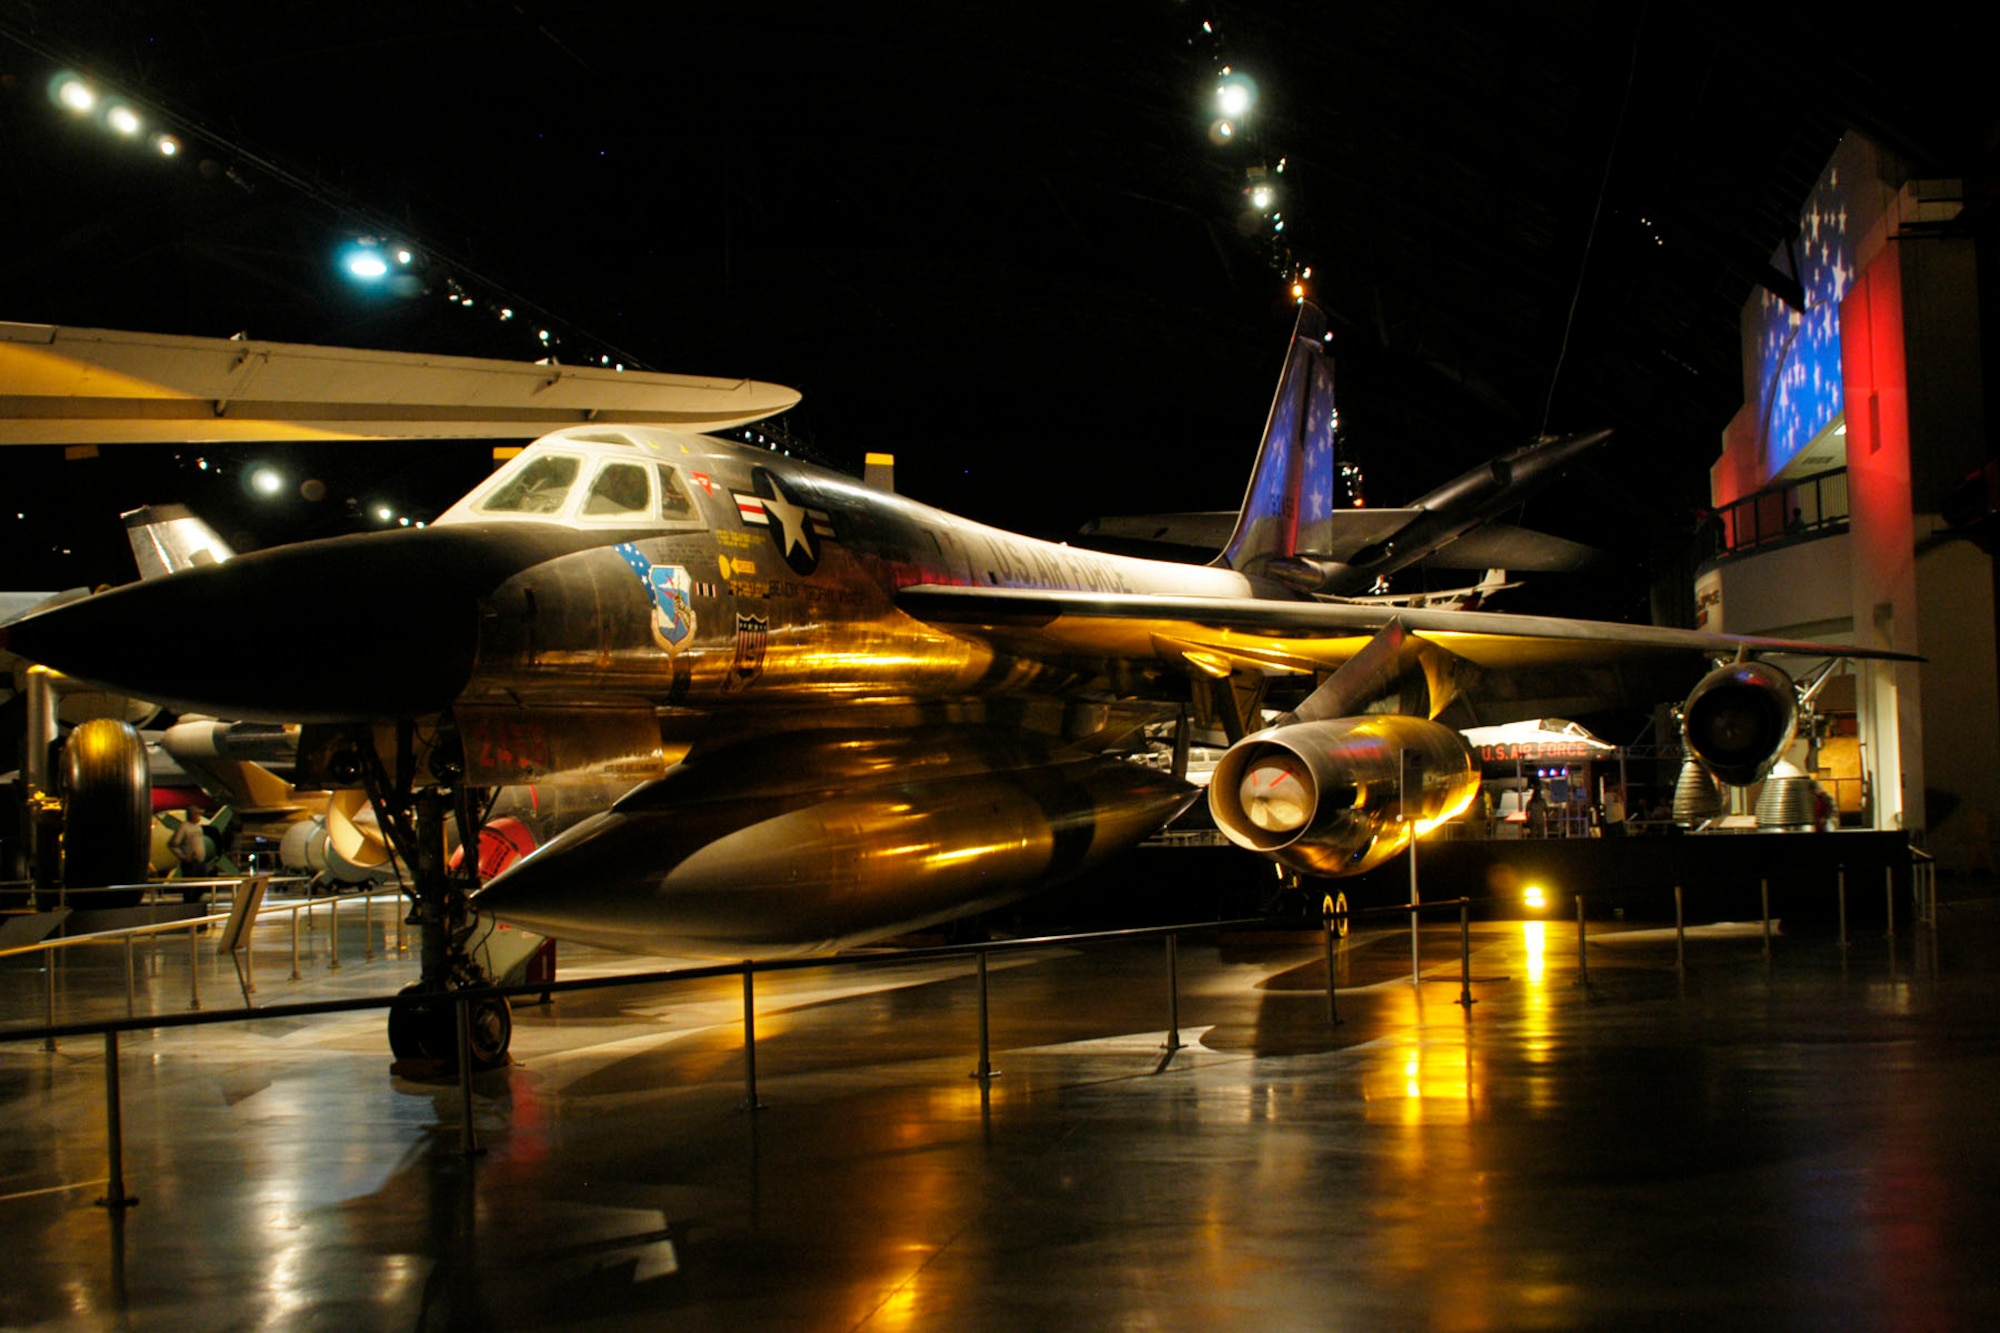 DAYTON, Ohio -- Convair B-58 Hustler in the Cold War Gallery at the National Museum of the United States Air Force. (U.S. Air Force photo)